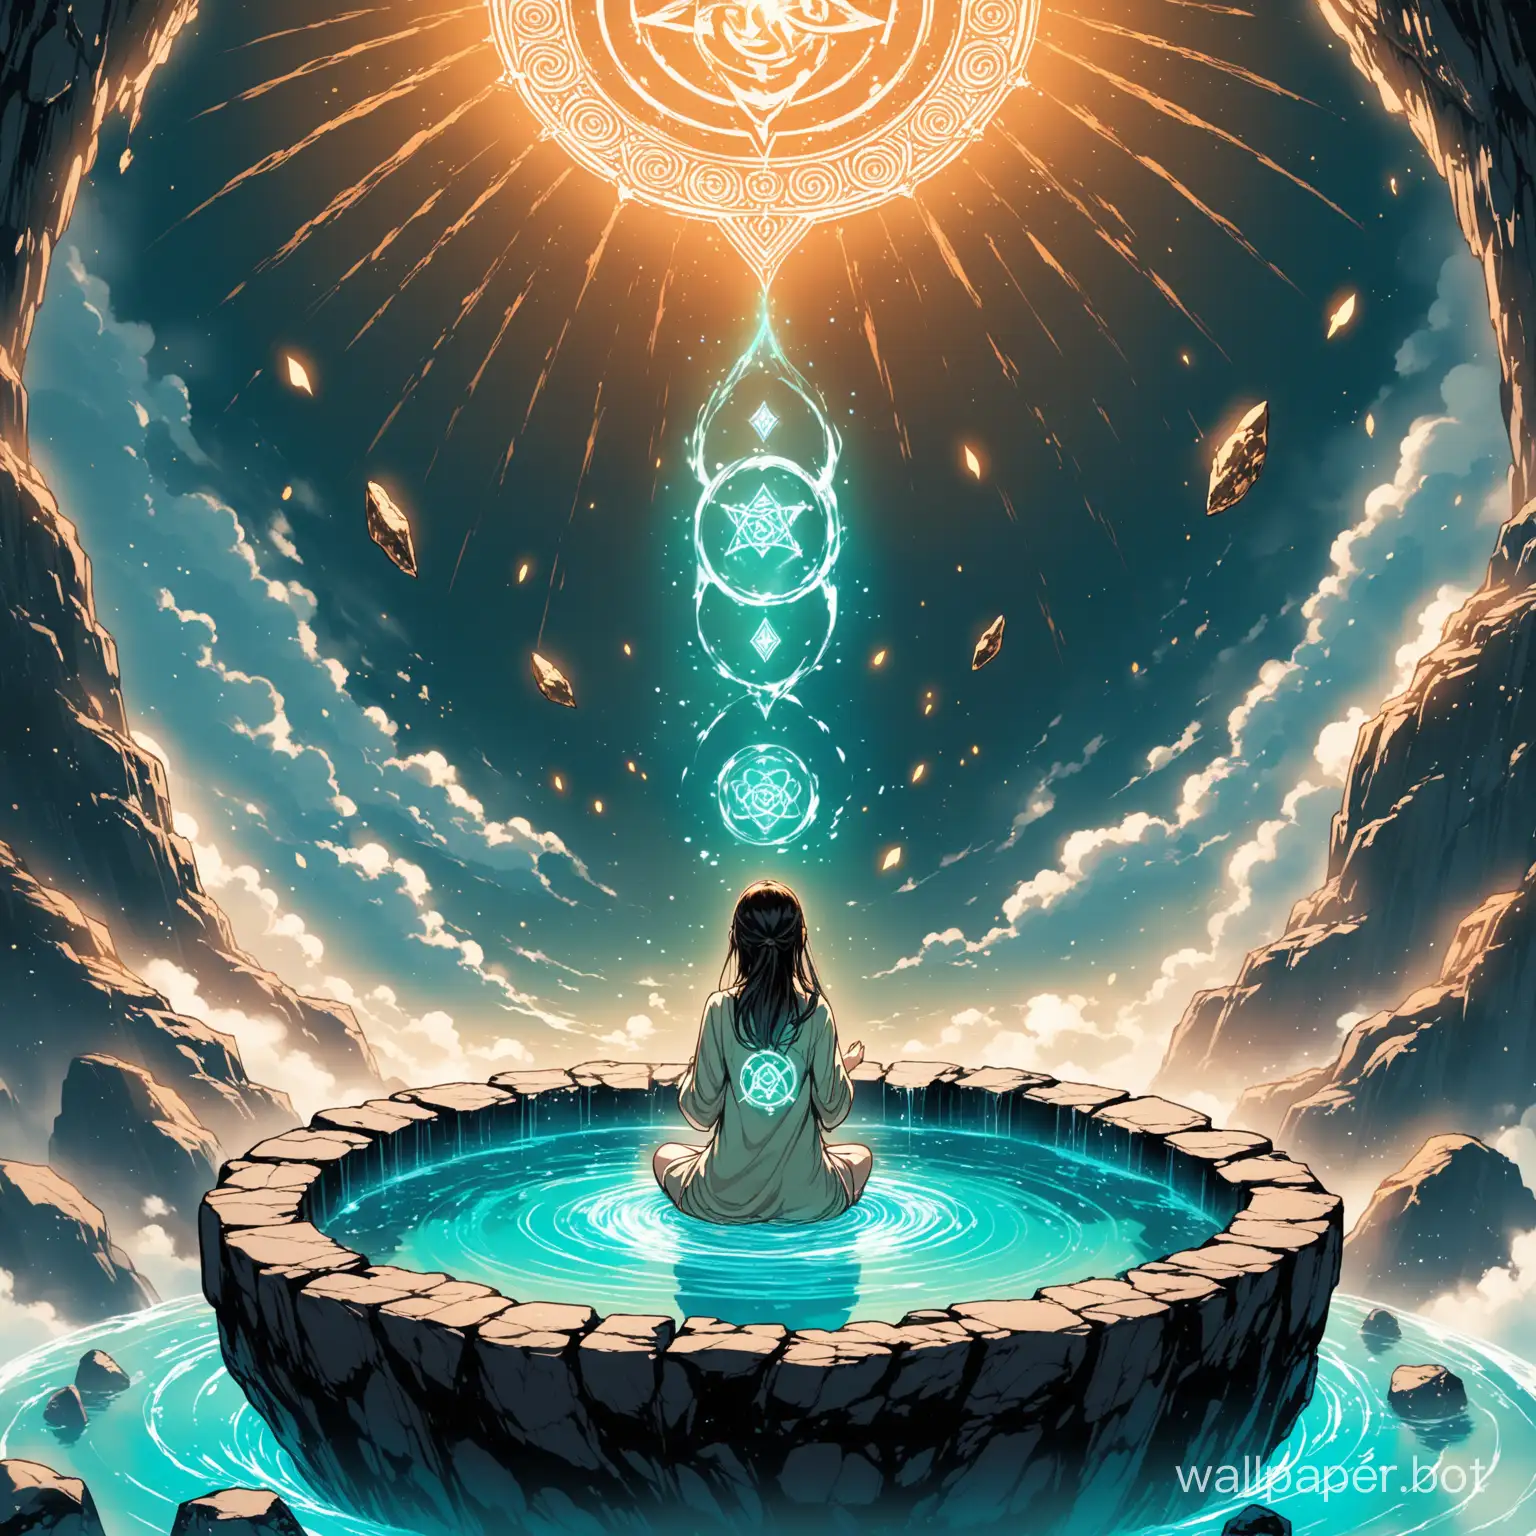 a girl sitting a make her concentrate in her ritual and there a flying ancient symbol in her around metal air water rock any element near from him suddenly appear in from of him even the air tribling becauz of the ritual



